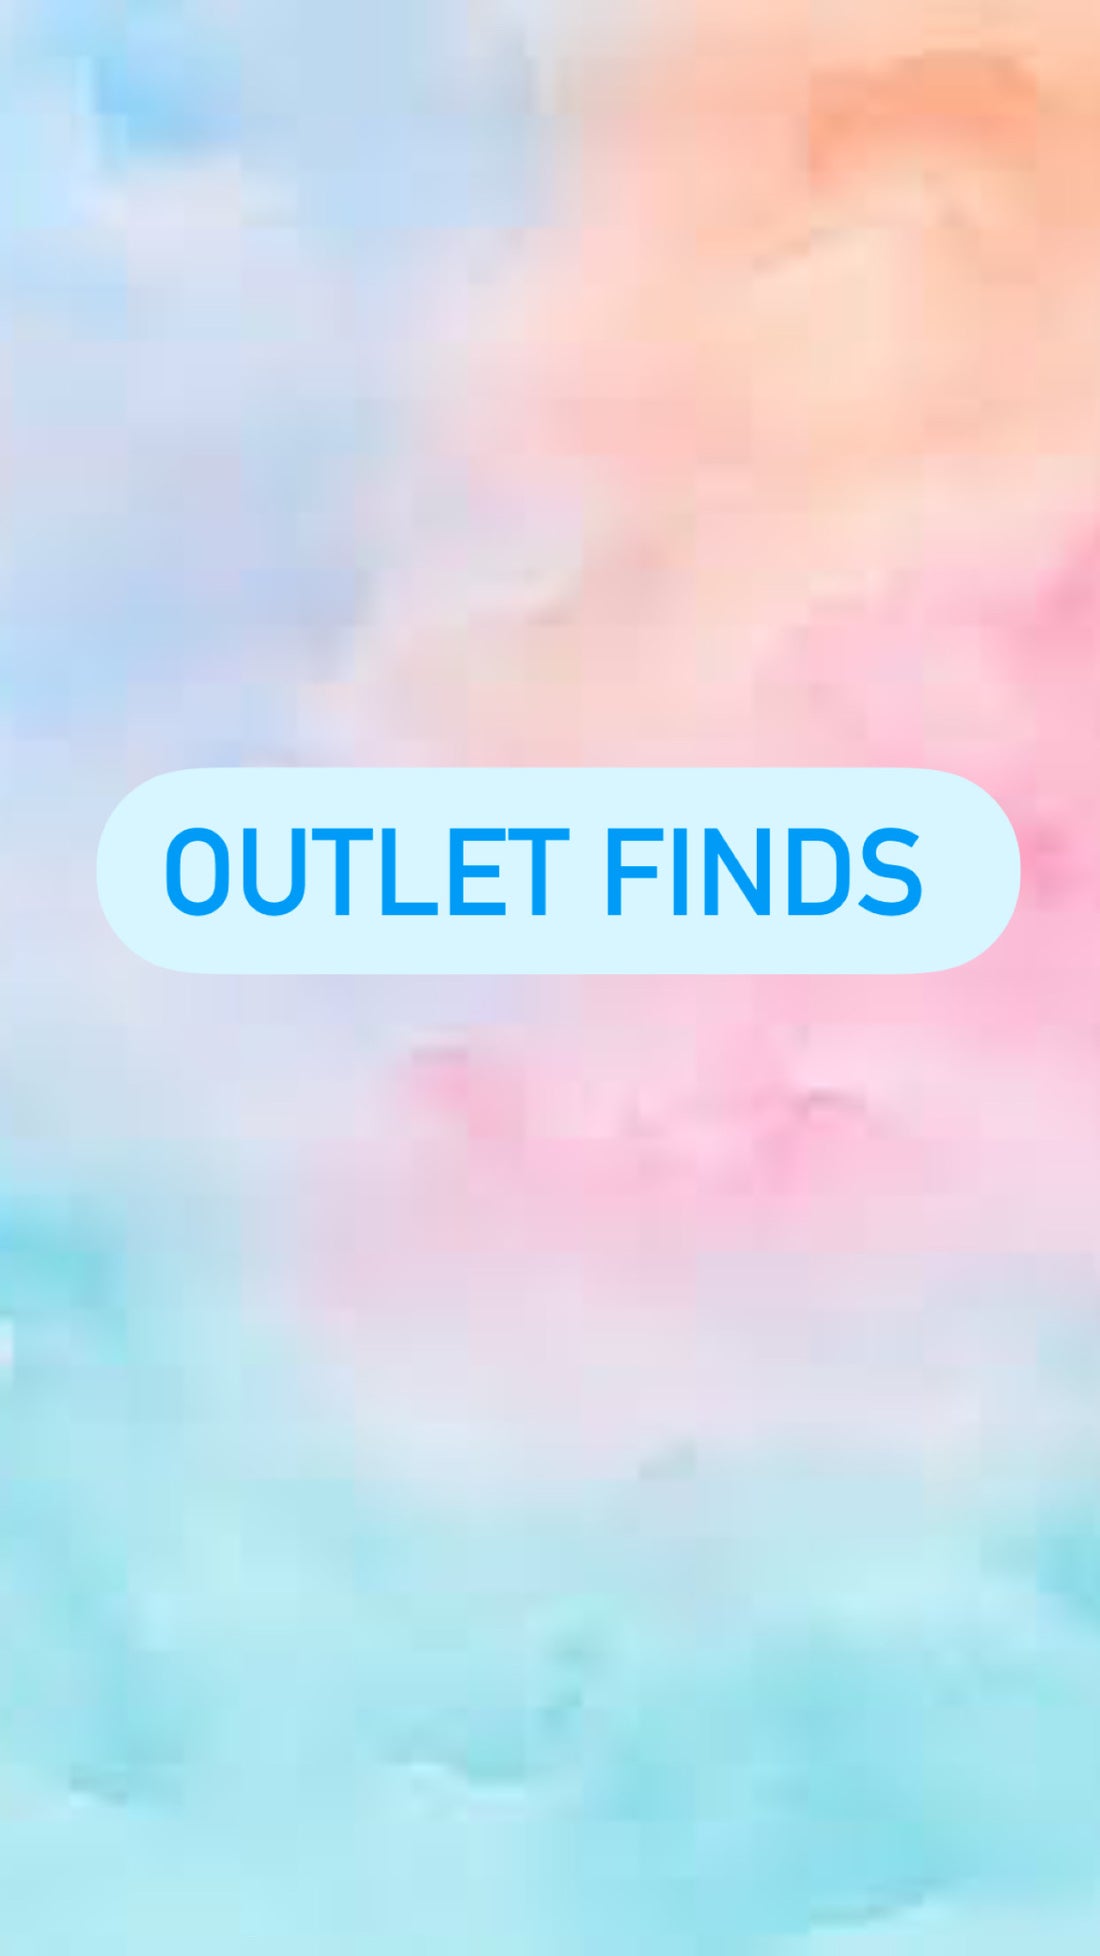  Outlet